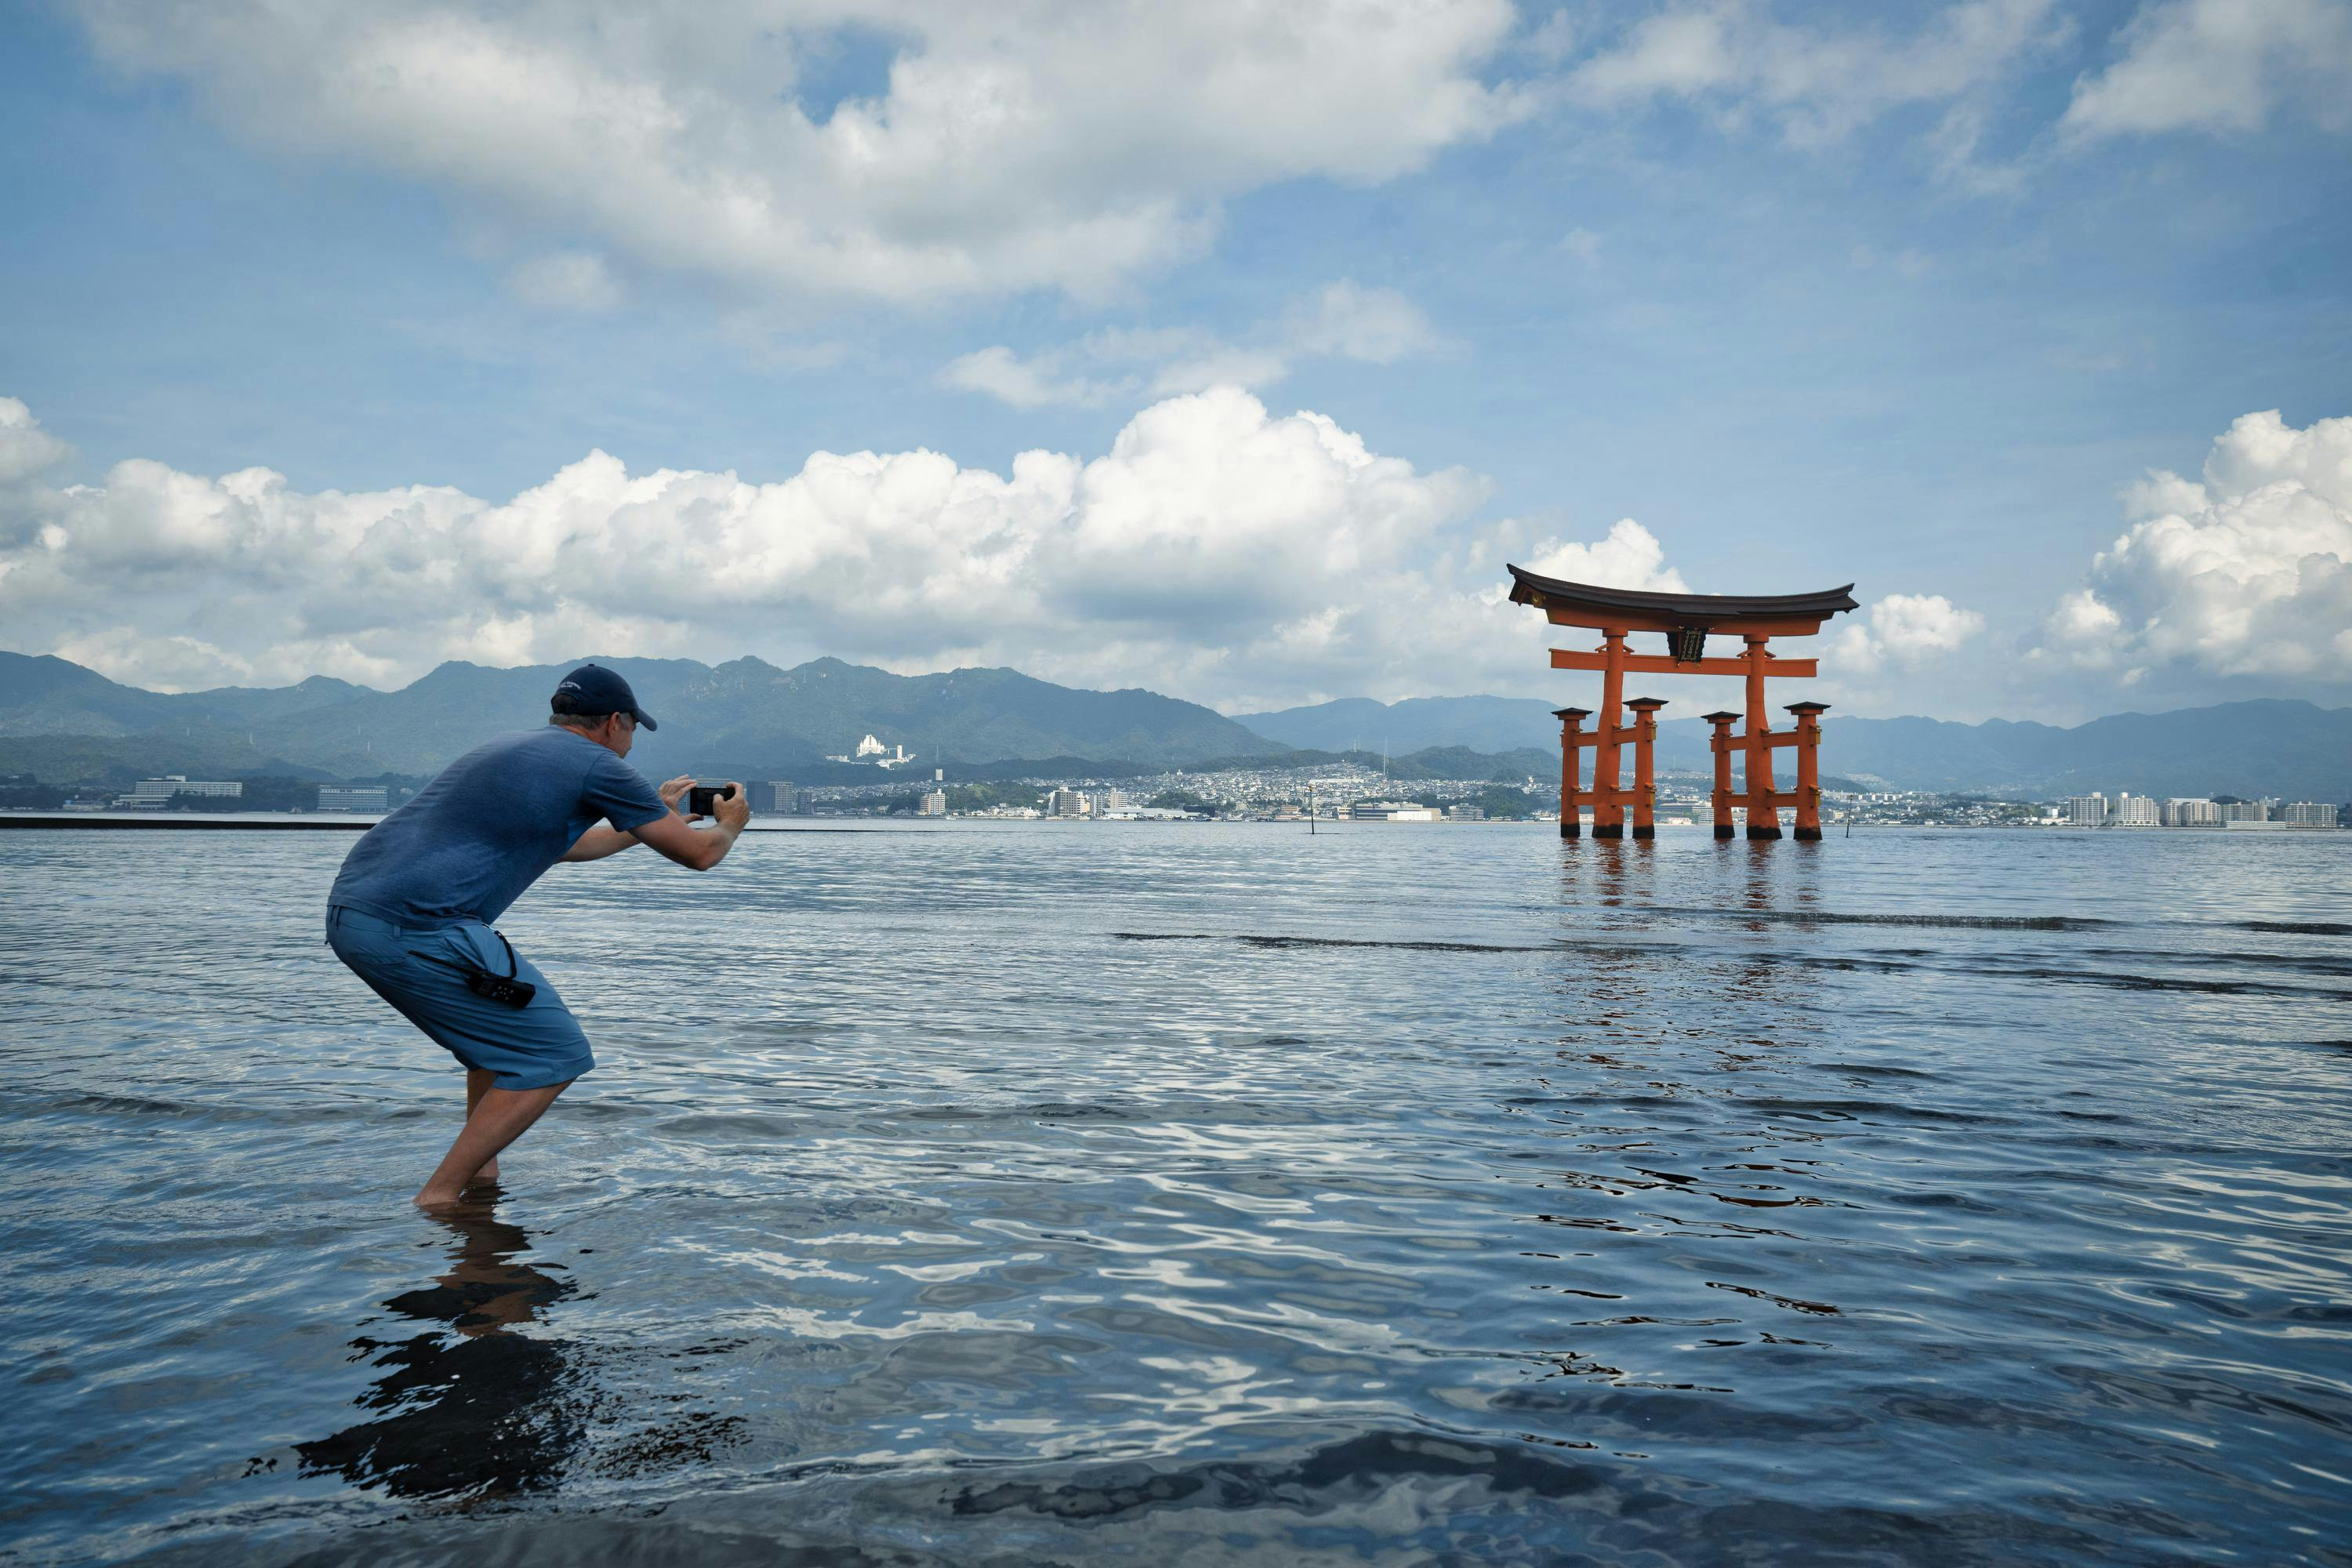 Itsukushima, or Miyajima, a serene island in Hiroshima Bay, Japan. Home to ancient temples and a famous partially submerged orange Great Torii Gate at high tide, marking the entrance to the 12th-century Itsukushima Shrine.